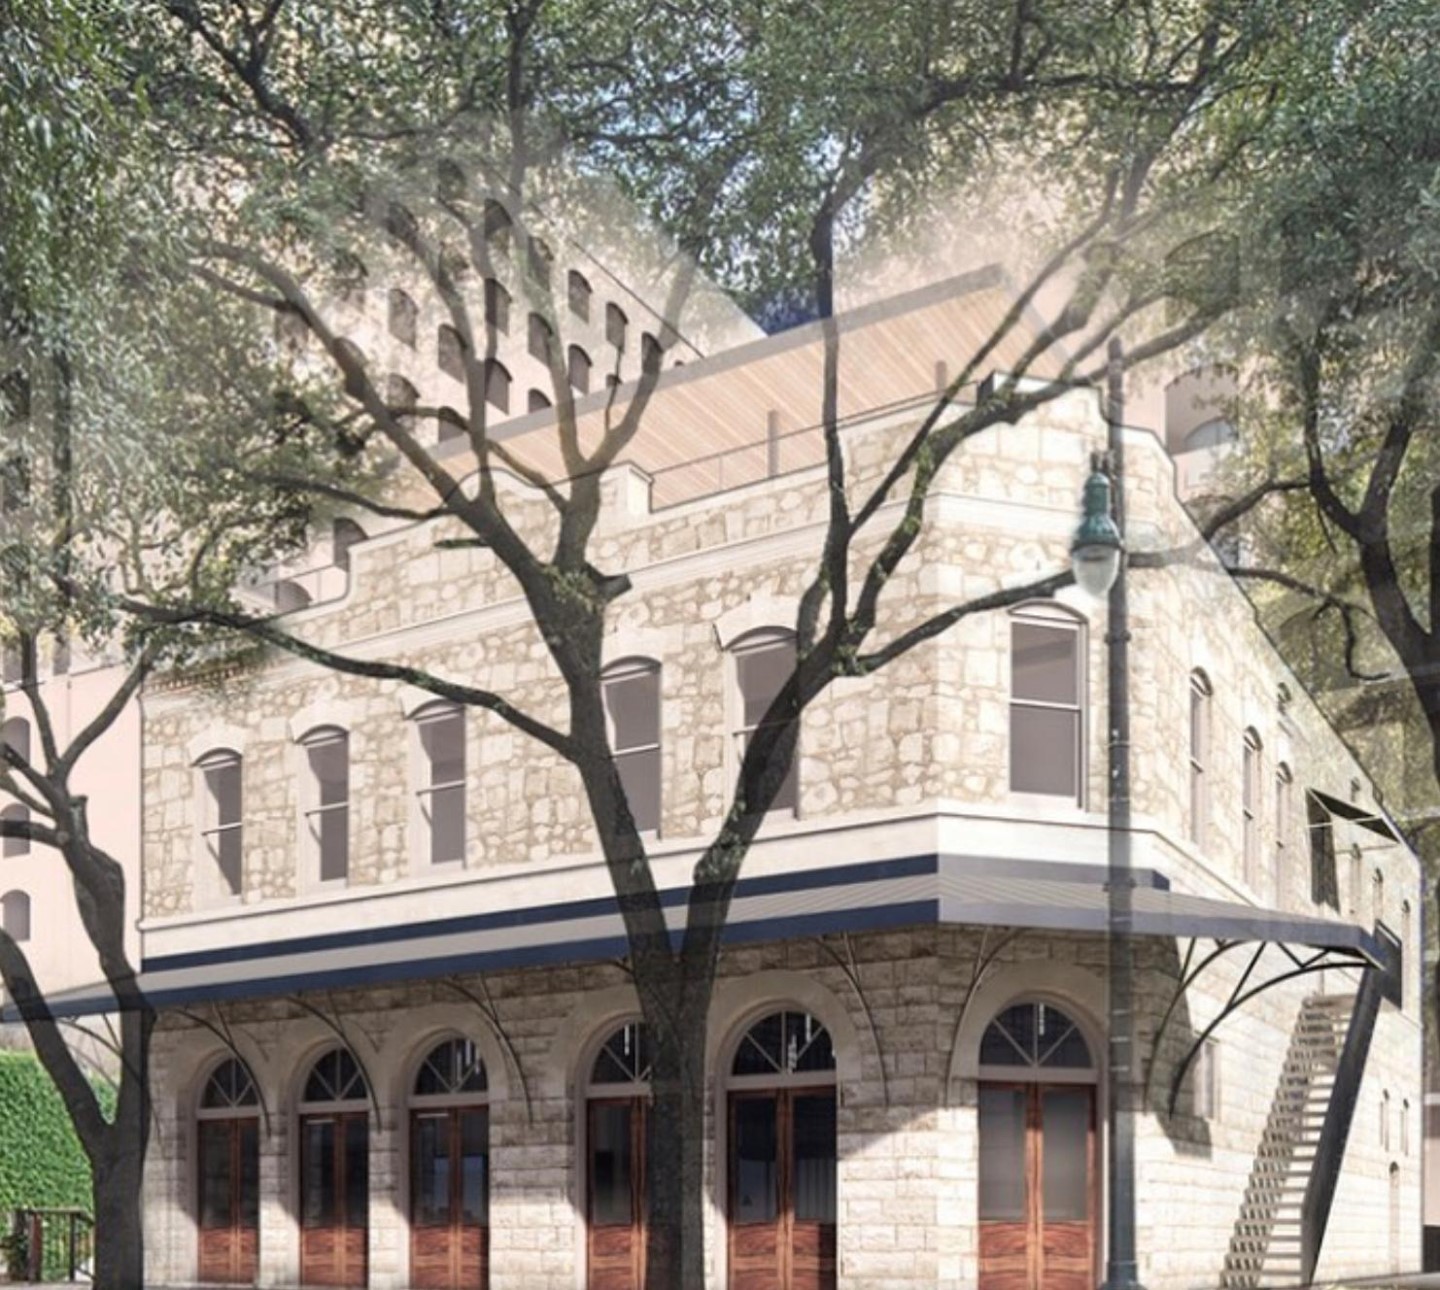 With so many historical buildings being erased from downtown Austin we are so proud to be able to restore this 1890s beauty to its glory. ⁠
⁠
@n883jj ⁠
@chioco_design ⁠
@michaelryandickson